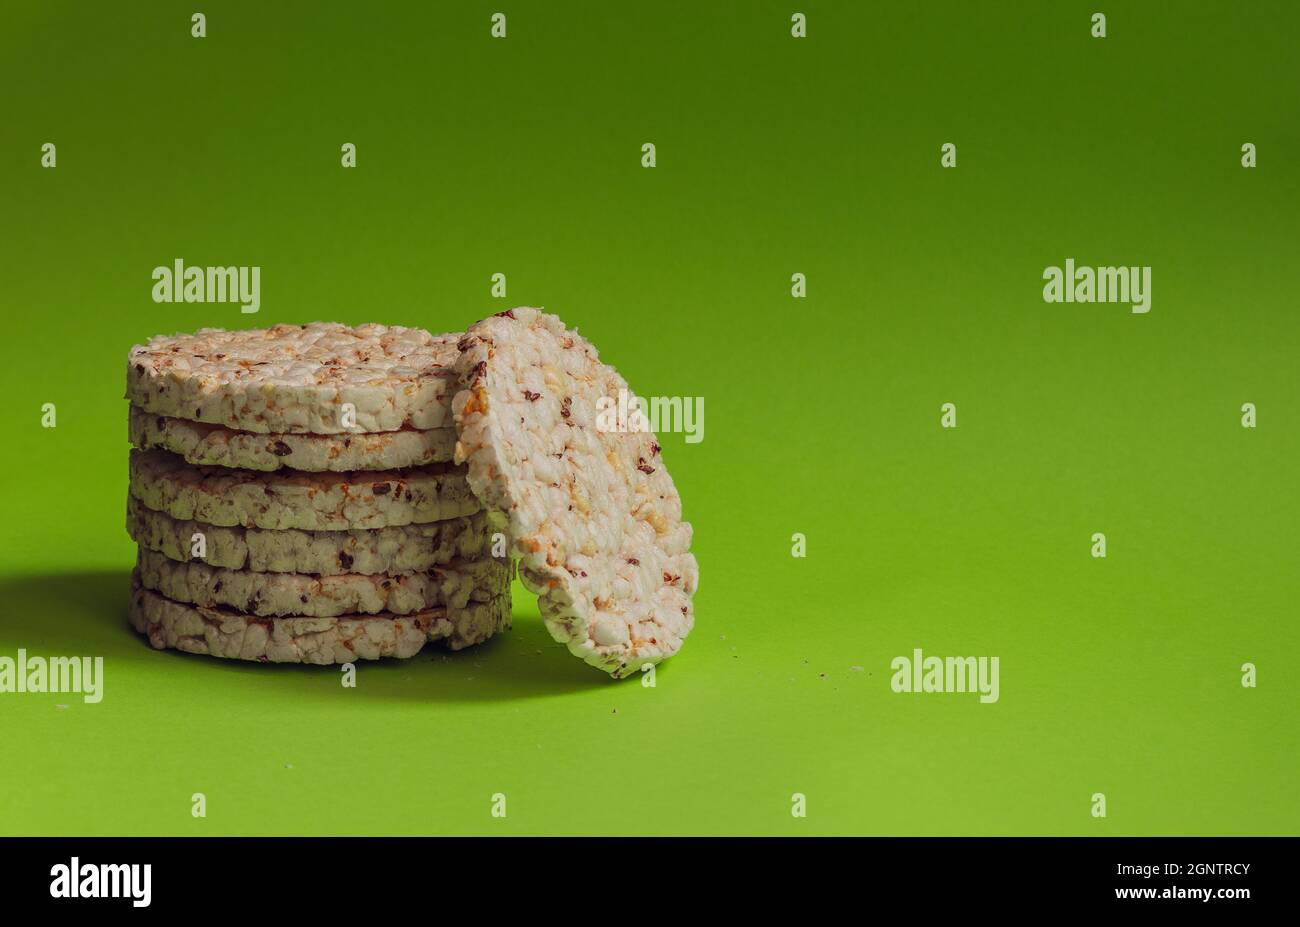 Rice cakes with grains stand in a column against a bright green background. Stock Photo